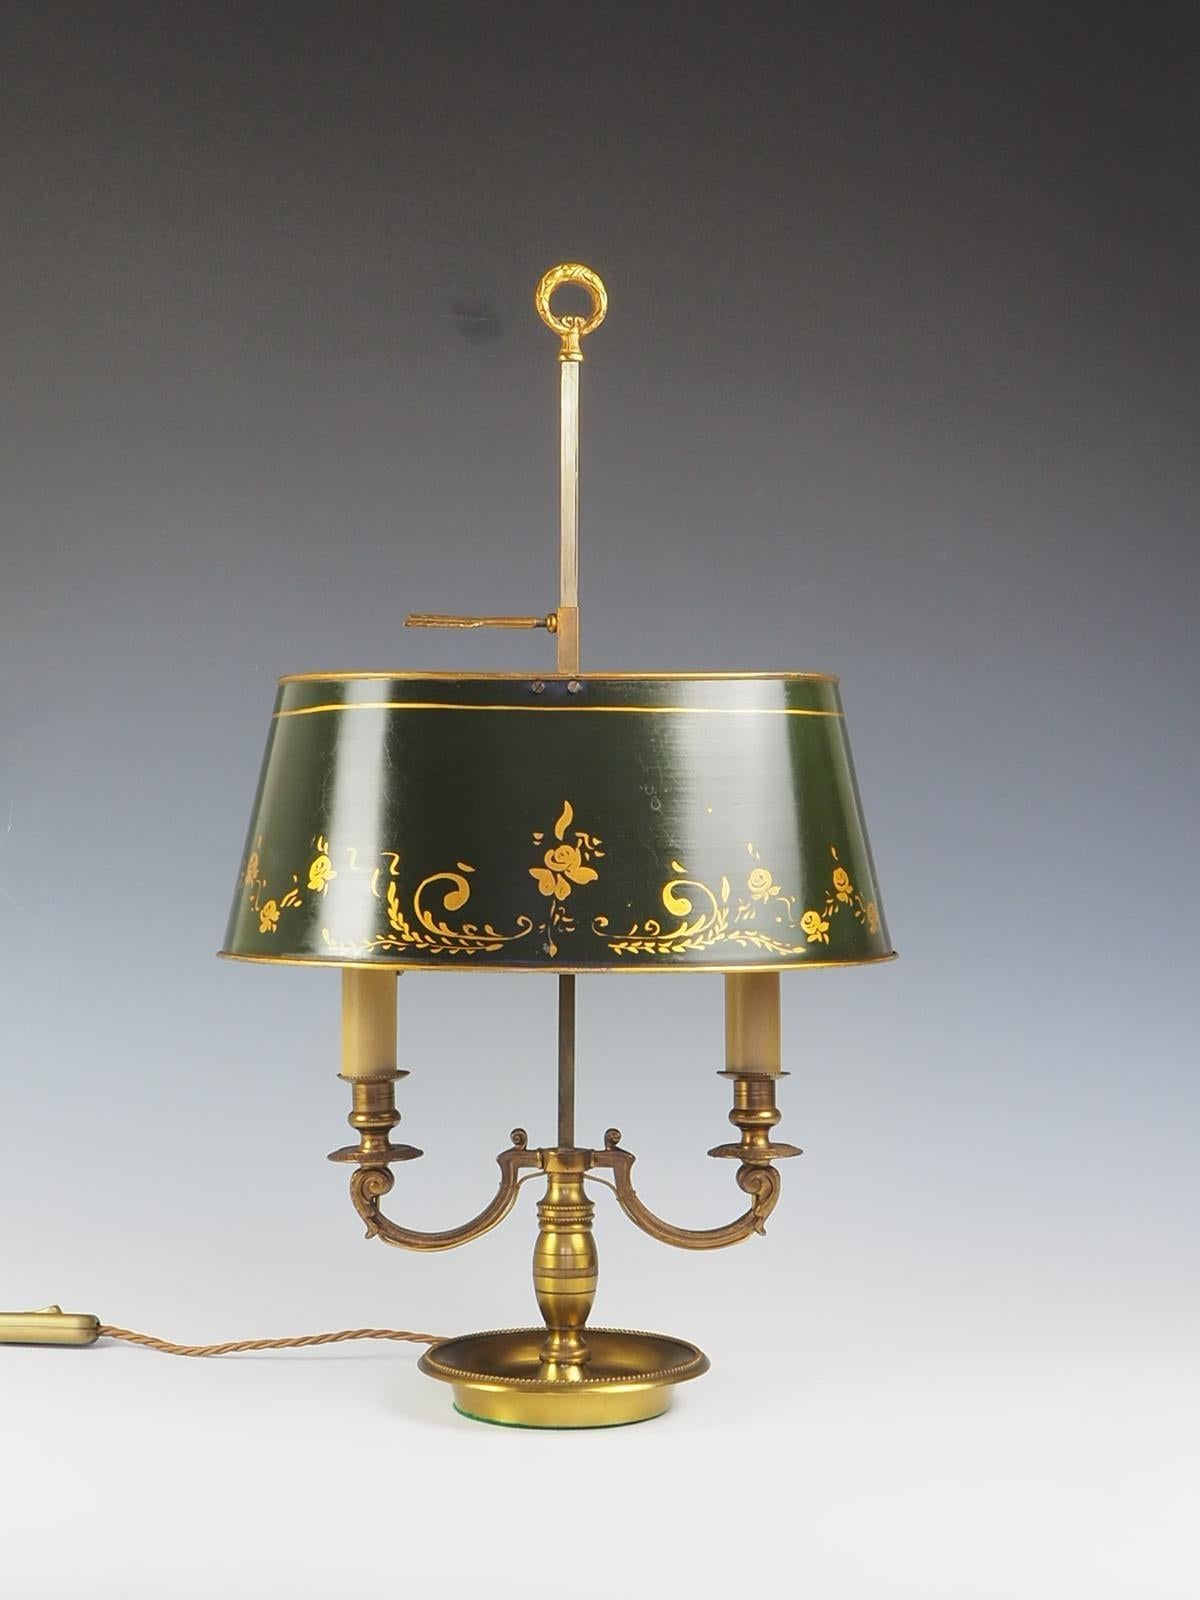 Antique French Bouillotte Table Lamp from the 20th Century is a stunning piece crafted from brass, featuring twin arm and an adjustable green shade.

The lamp exudes elegance and sophistication, making it a perfect addition to any traditional or